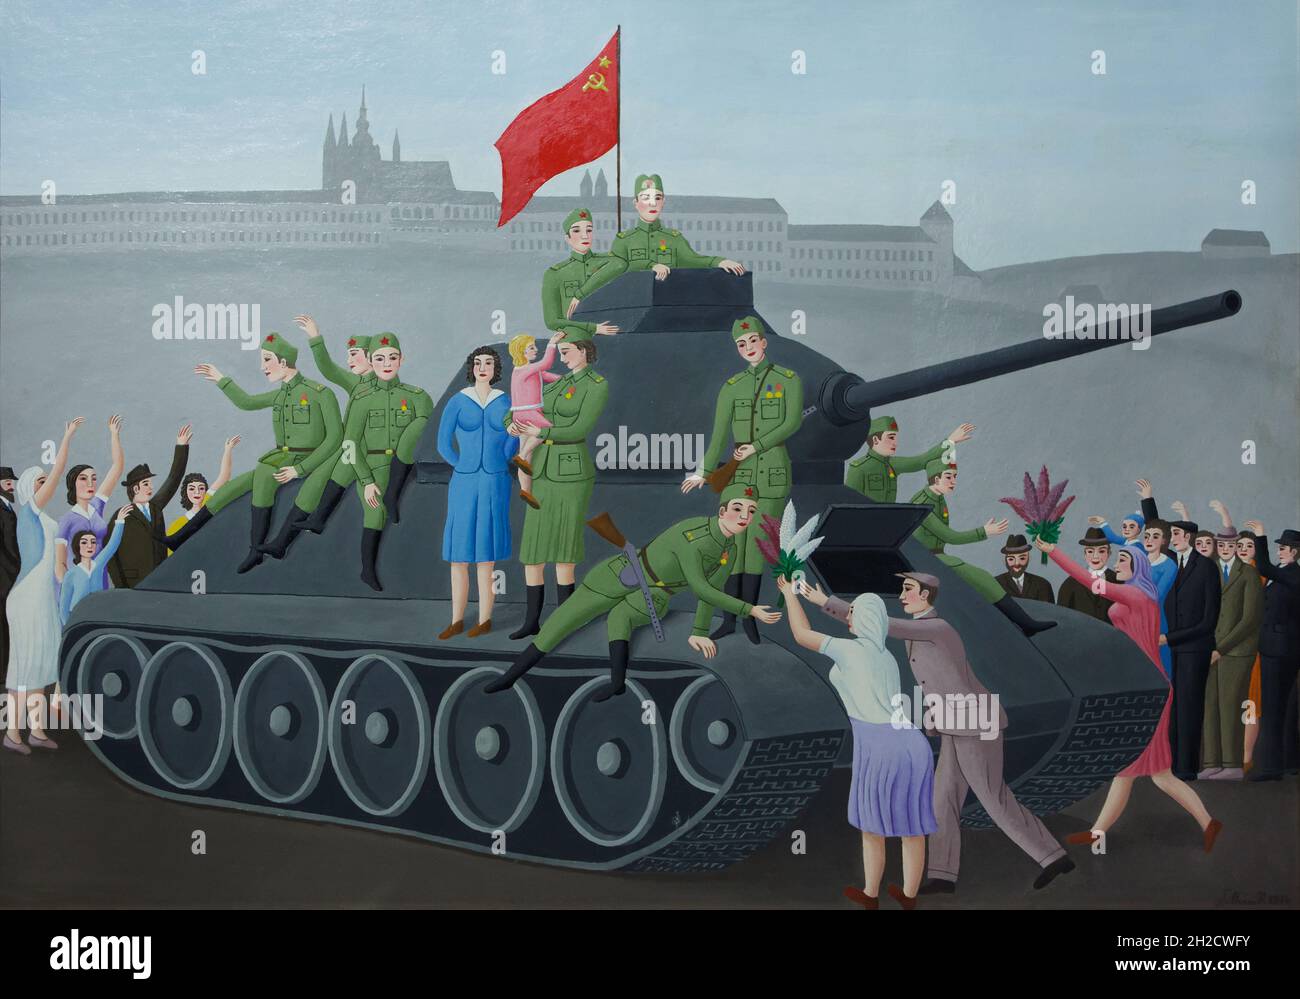 Painting 'Liberation' by Czech naïve artist Václav Šilhán (1974) on display in the National Museum (Národní muzeum) in Prague, Czech Republic. A Soviet tank and Red army soldiers being welcomed by local people in Prague, Czechoslovakia, shortly after the liberation of the city on 9 May 1945 are depicted in the painting, which is on view at the new permanent exhibition of the National Museum devoted to the History of the 20th century. Stock Photo